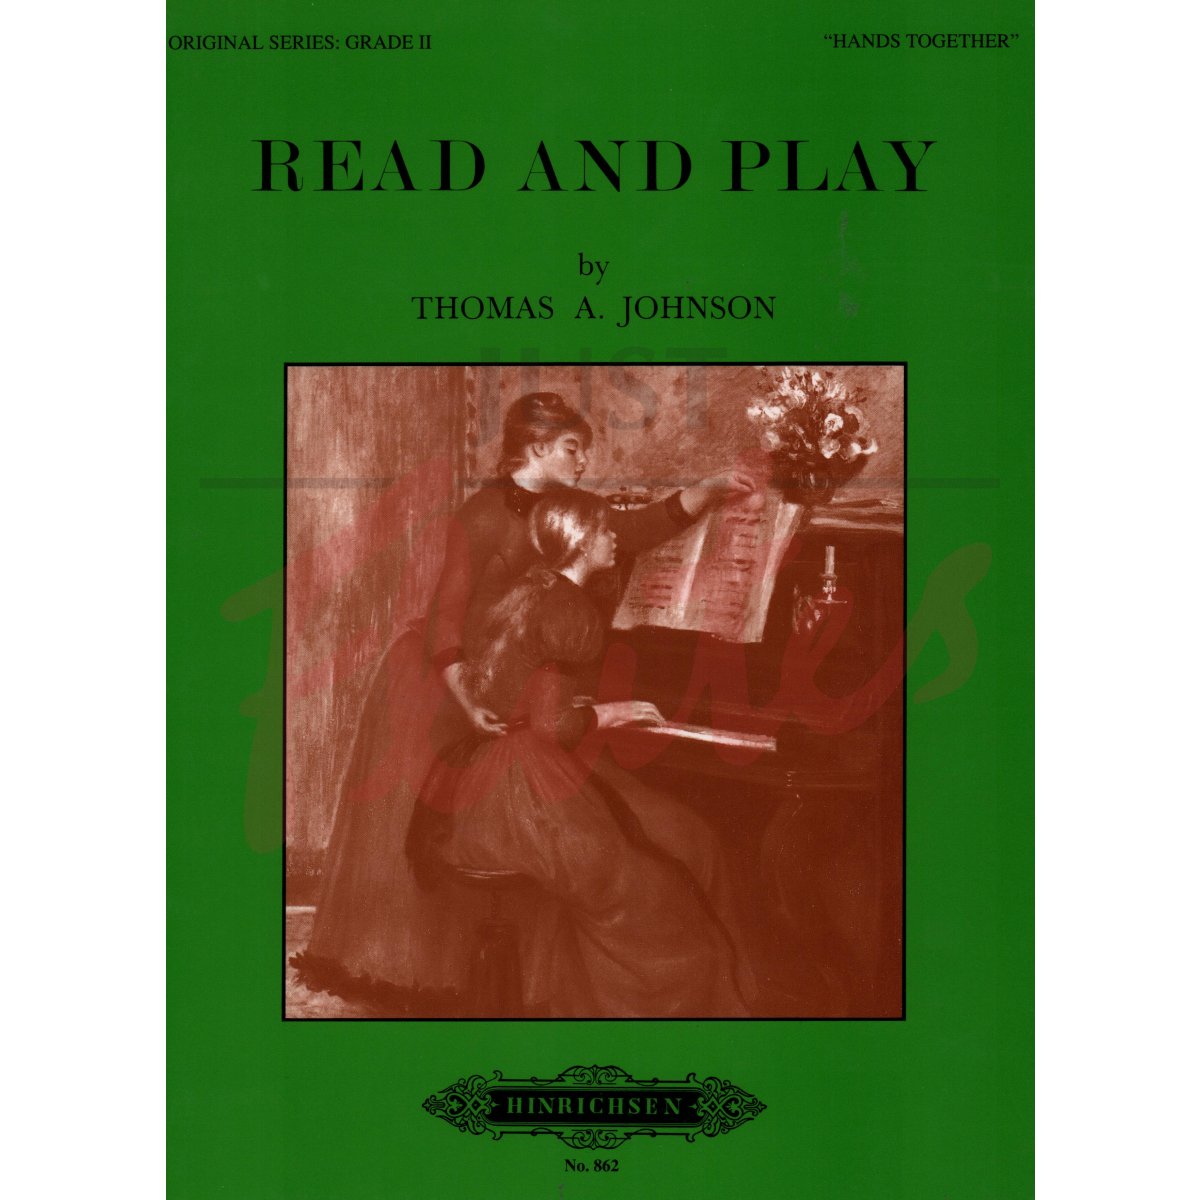 Read and Play for Piano, Grade 2 (Original Series)